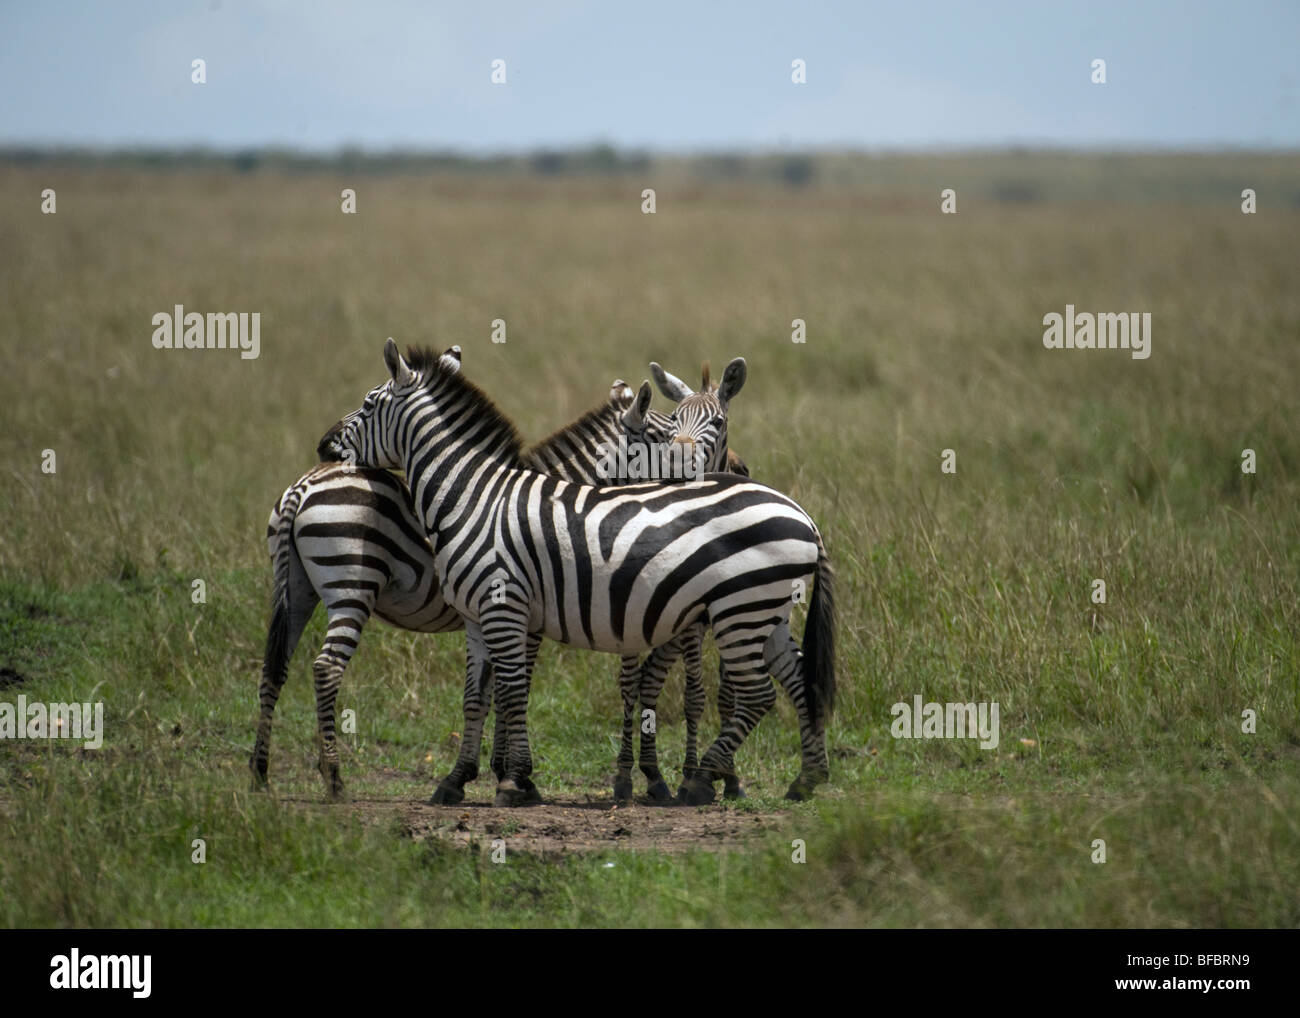 Zebras on the look out Stock Photo